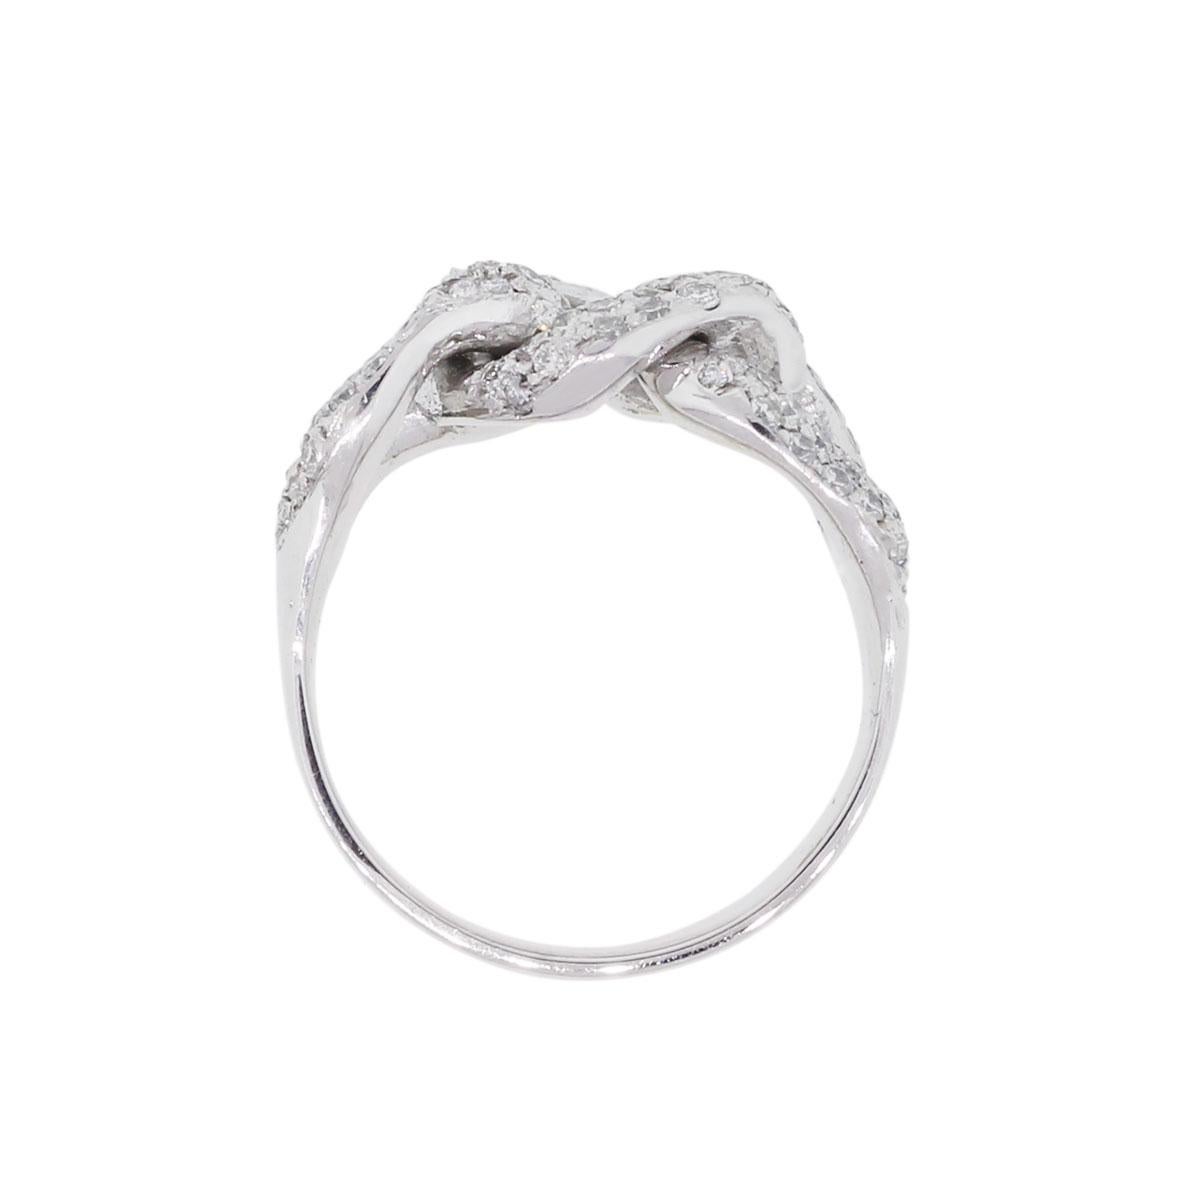 Material: 18k white gold
Diamond Details: Approximately 1ctw of round brilliant pave set diamonds. Diamonds are G/H in color and VS in clarity
Ring Size: 6.50 (can be sized)
Ring Measurements: 0.88″ x 0.42″ x 0.78″
Total Weight: 7.7g